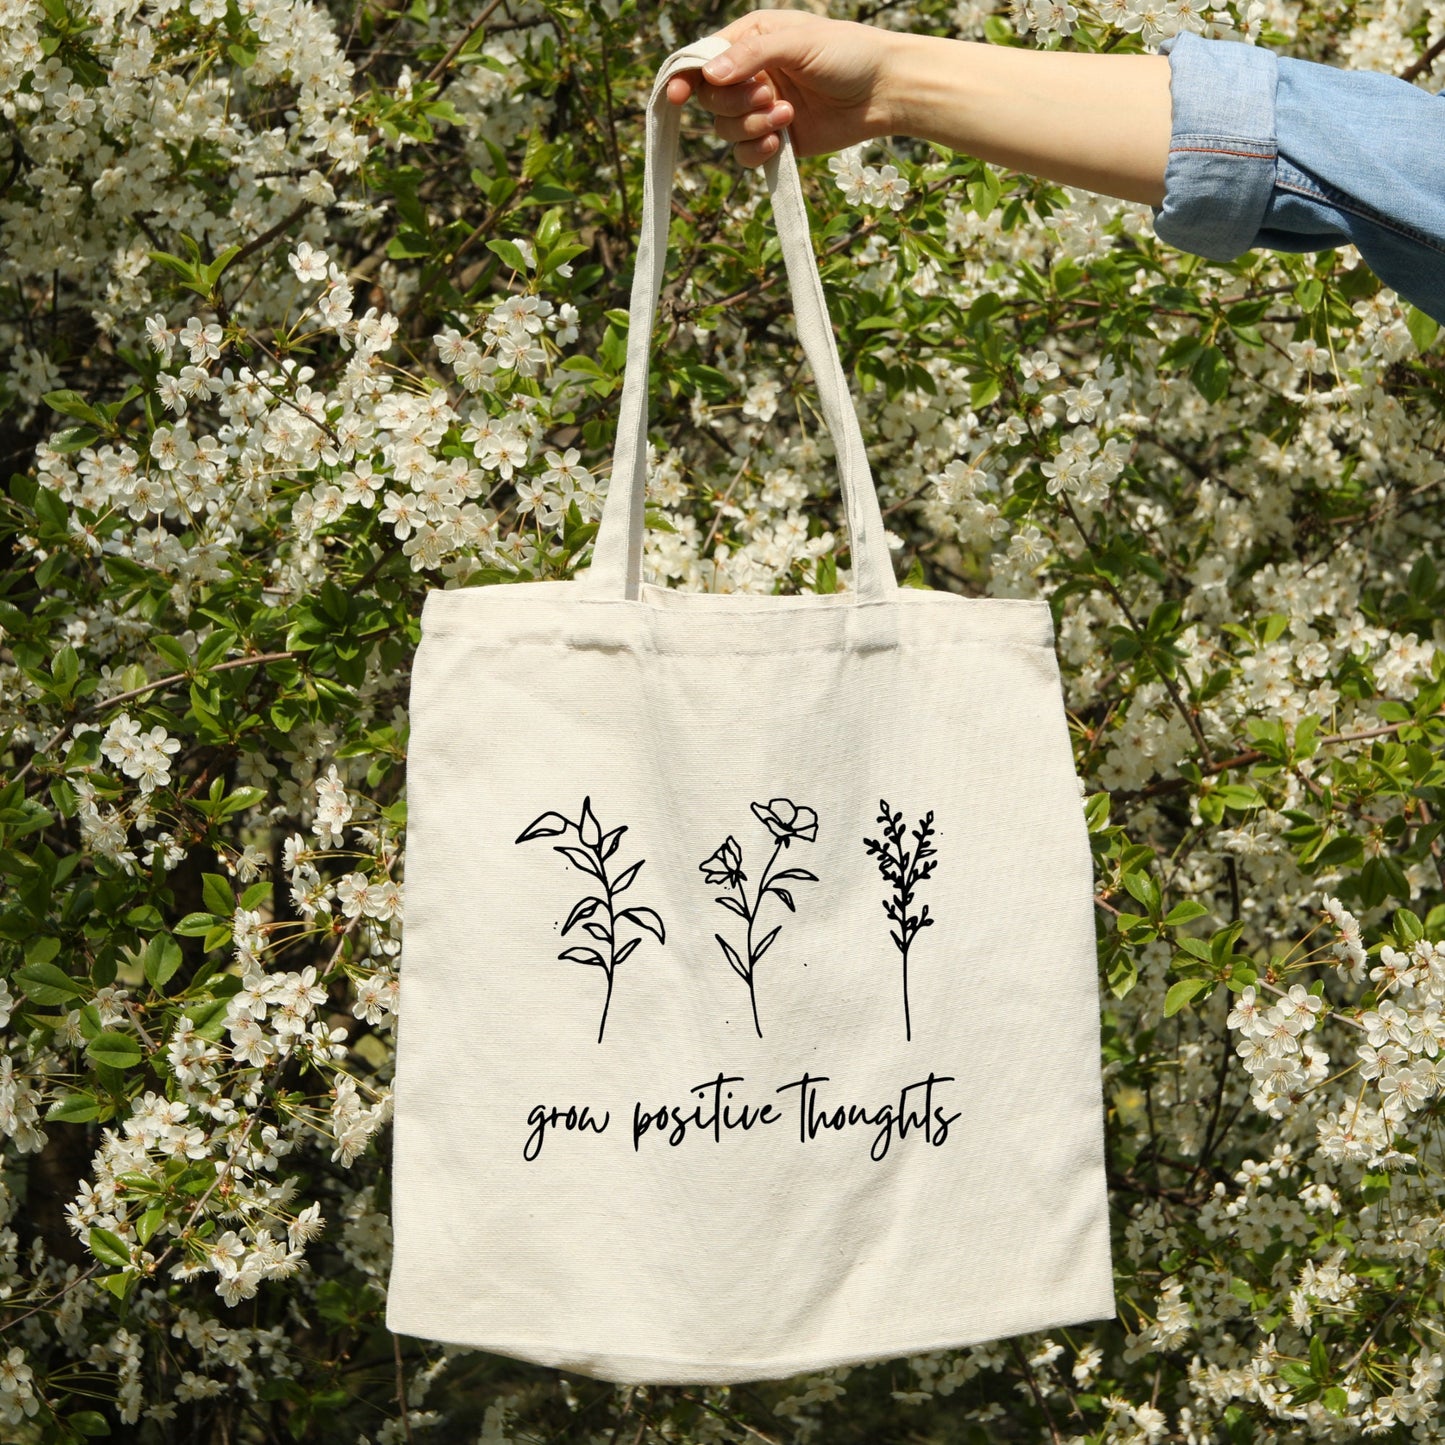 Grow Positive Thoughts Canvas Tote Bag